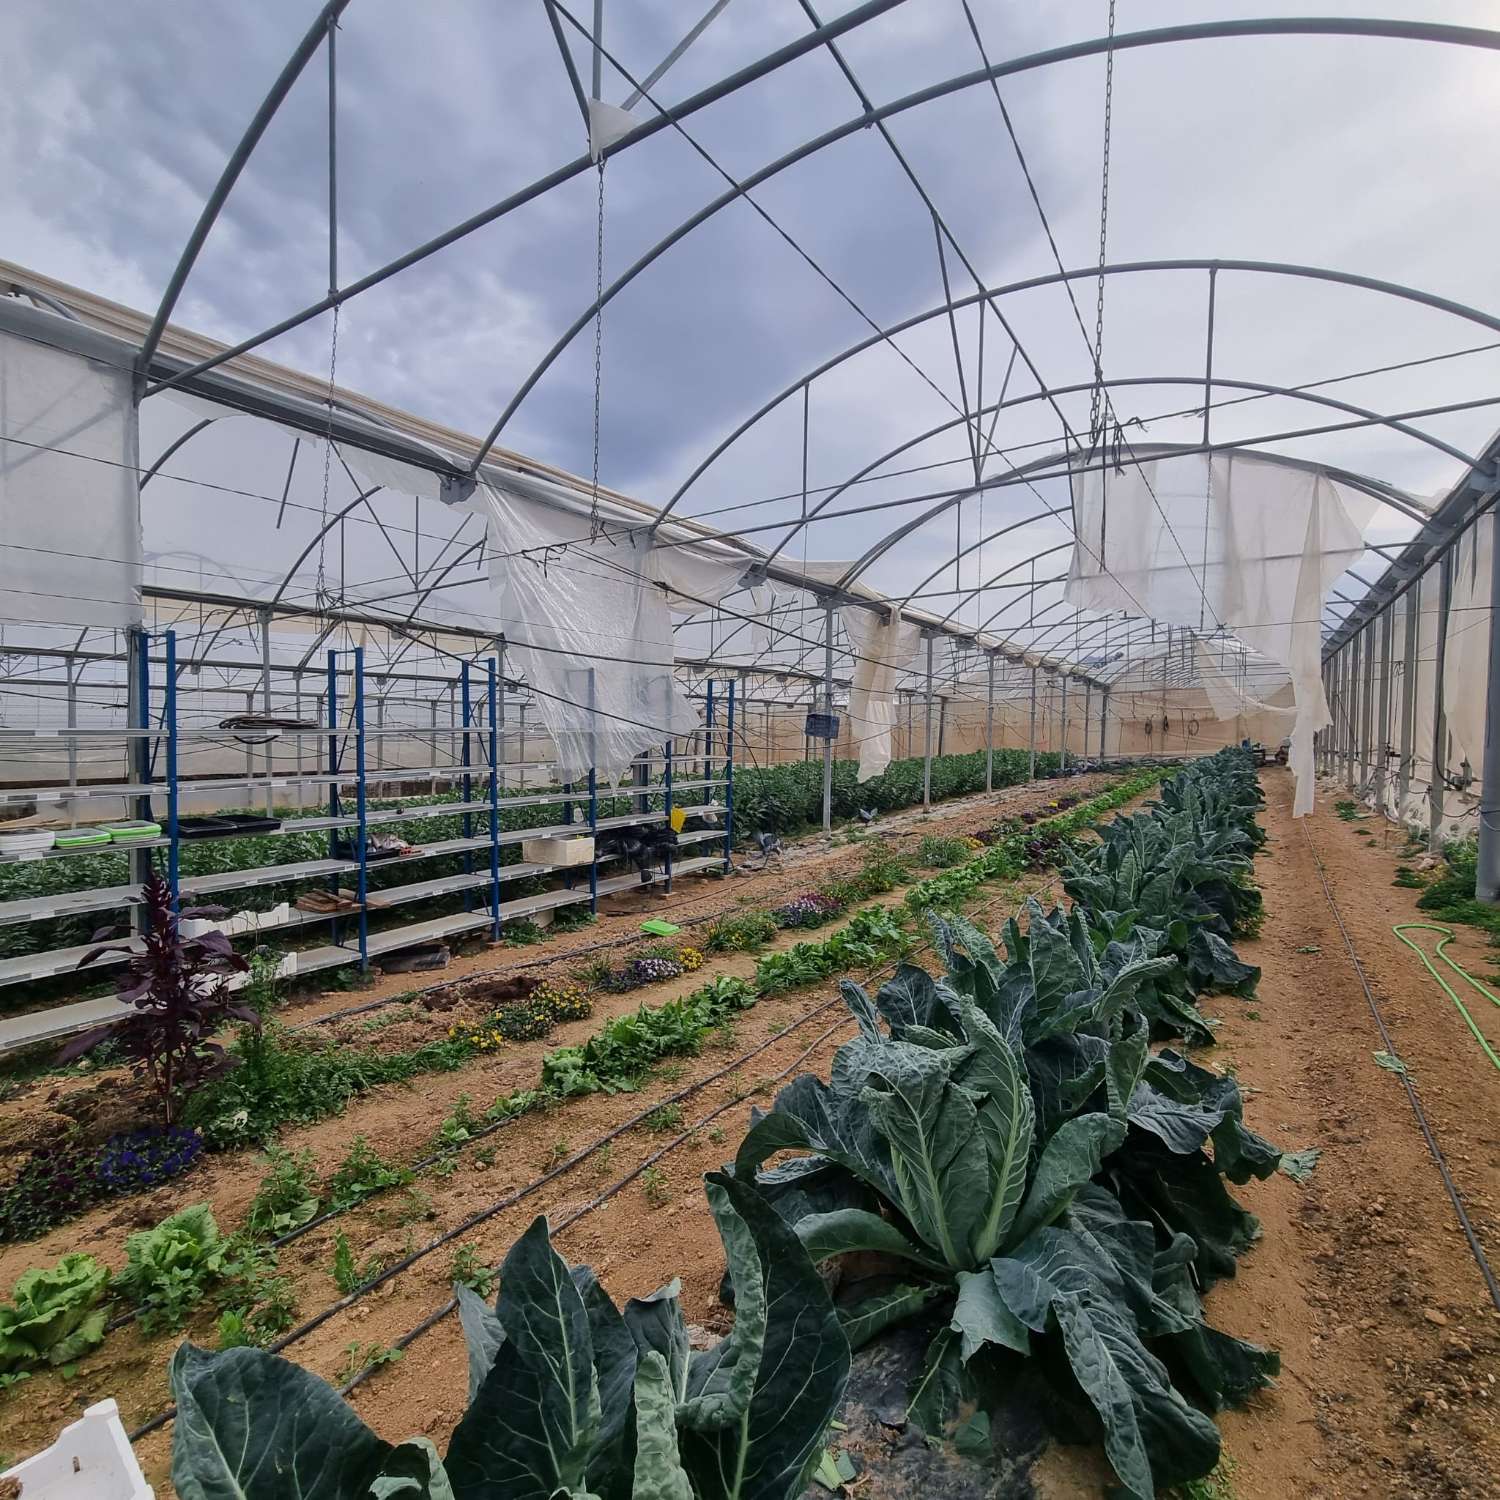 Finca Rustica with 4500m2 of greenhouses